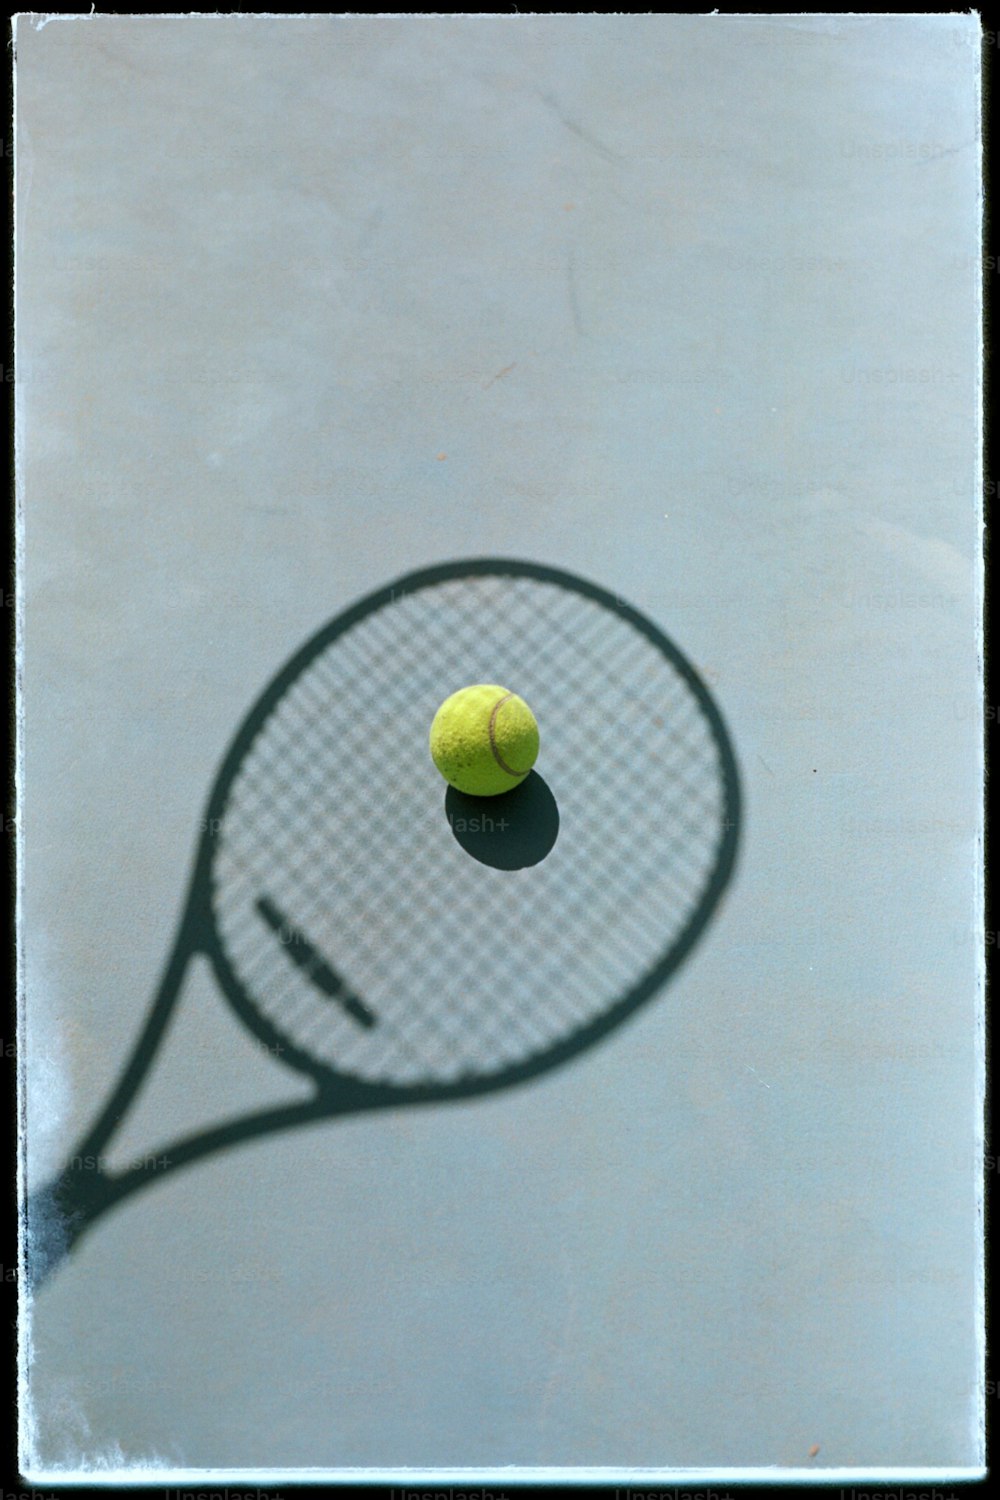 a shadow of a tennis racket and a tennis ball